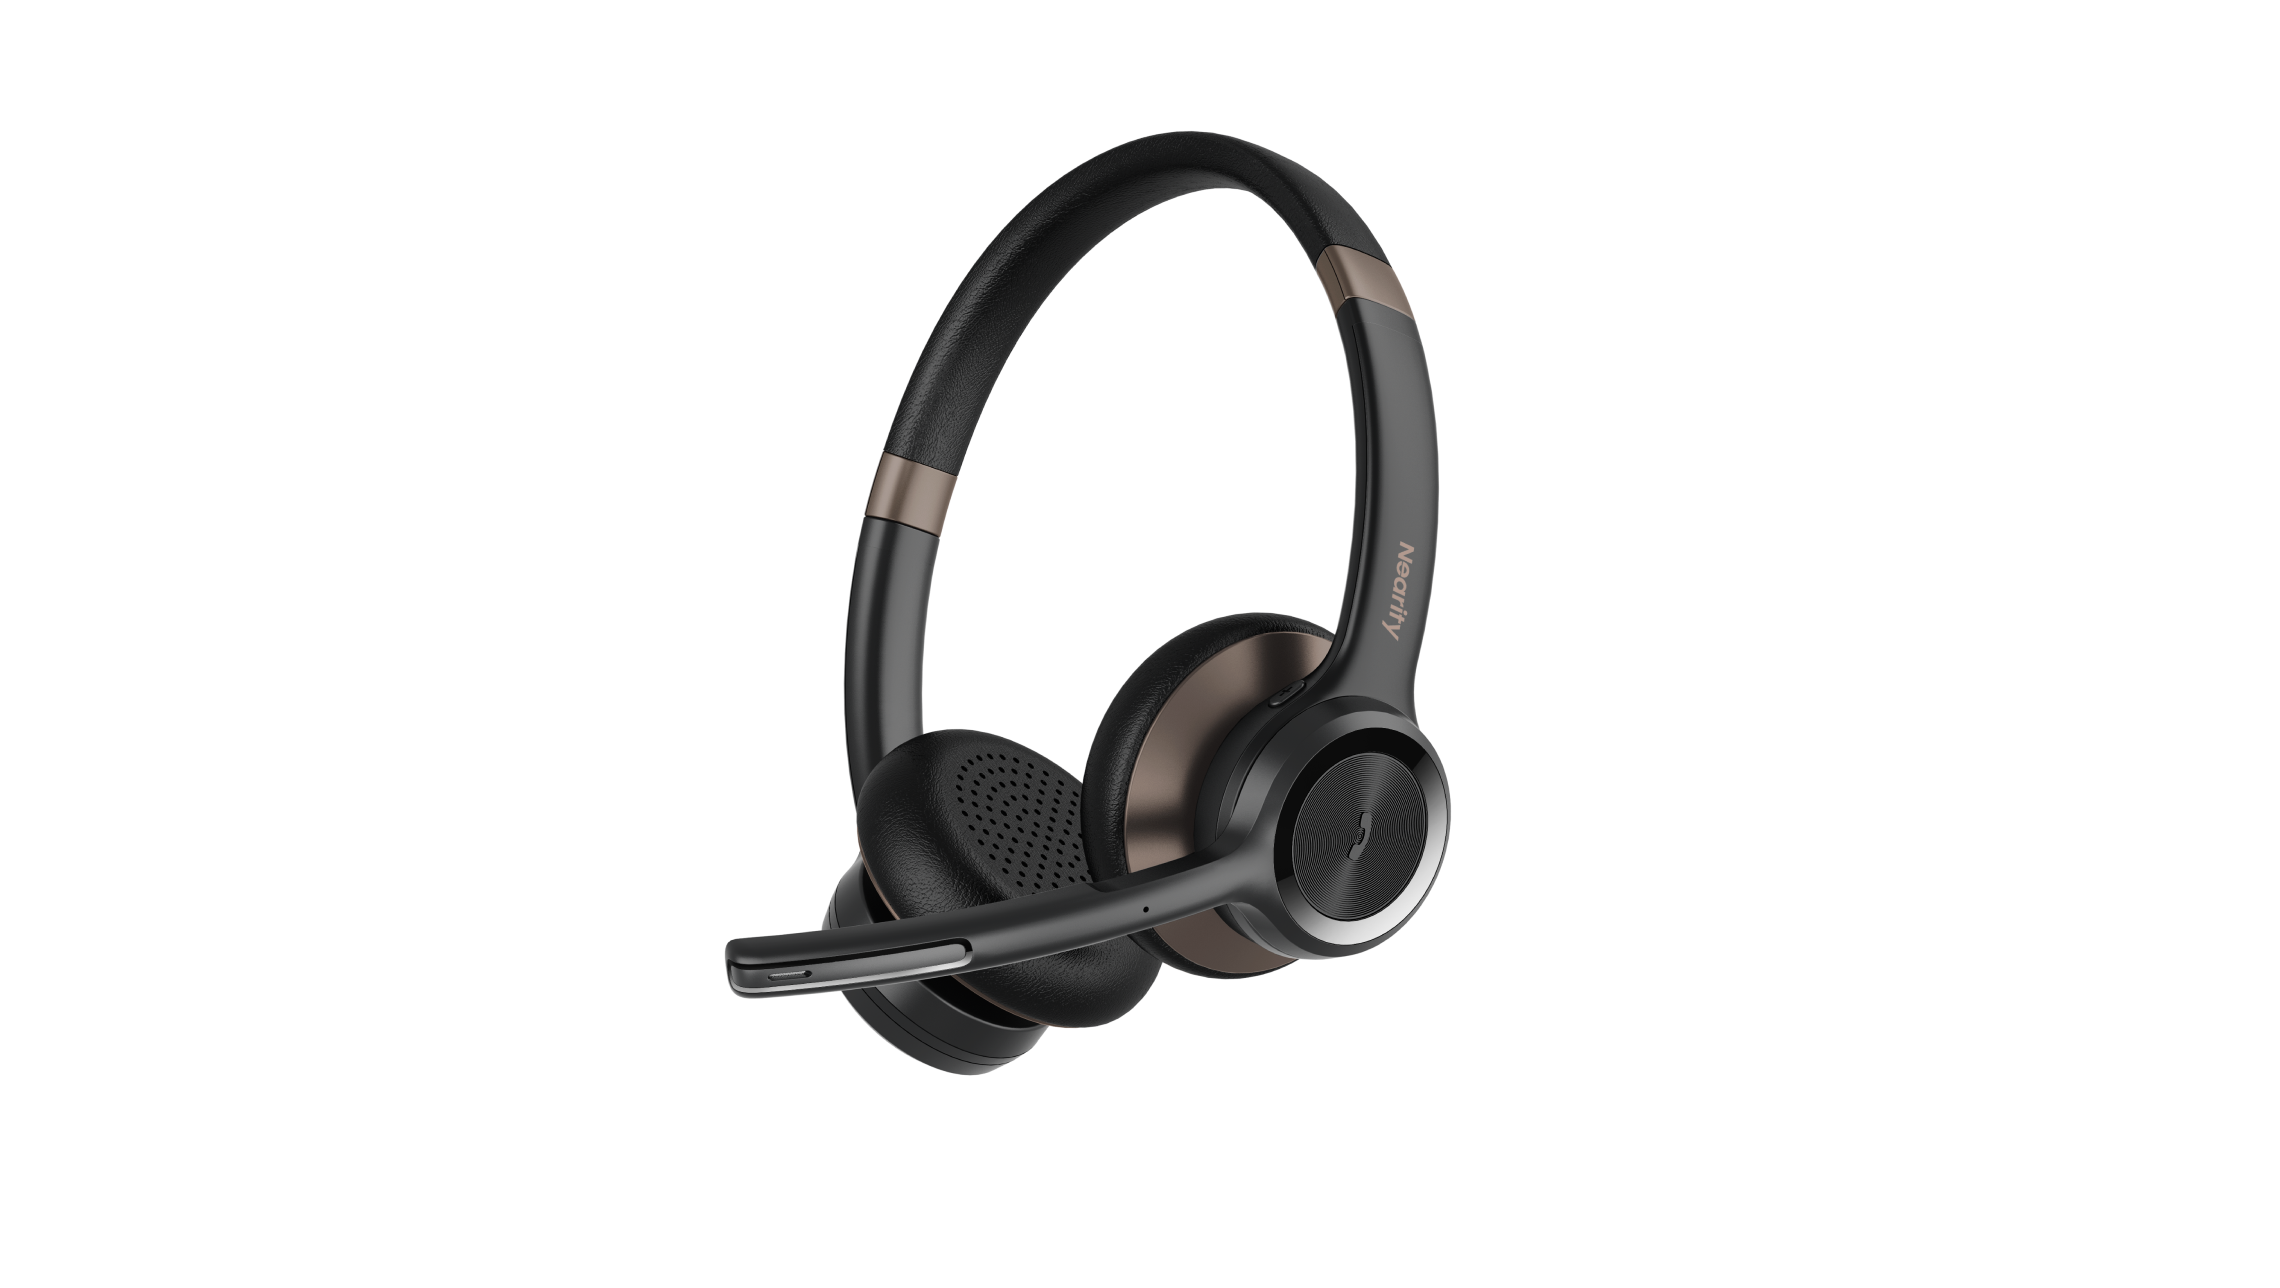 /Products/Headset/HP30/HP30_1.webp